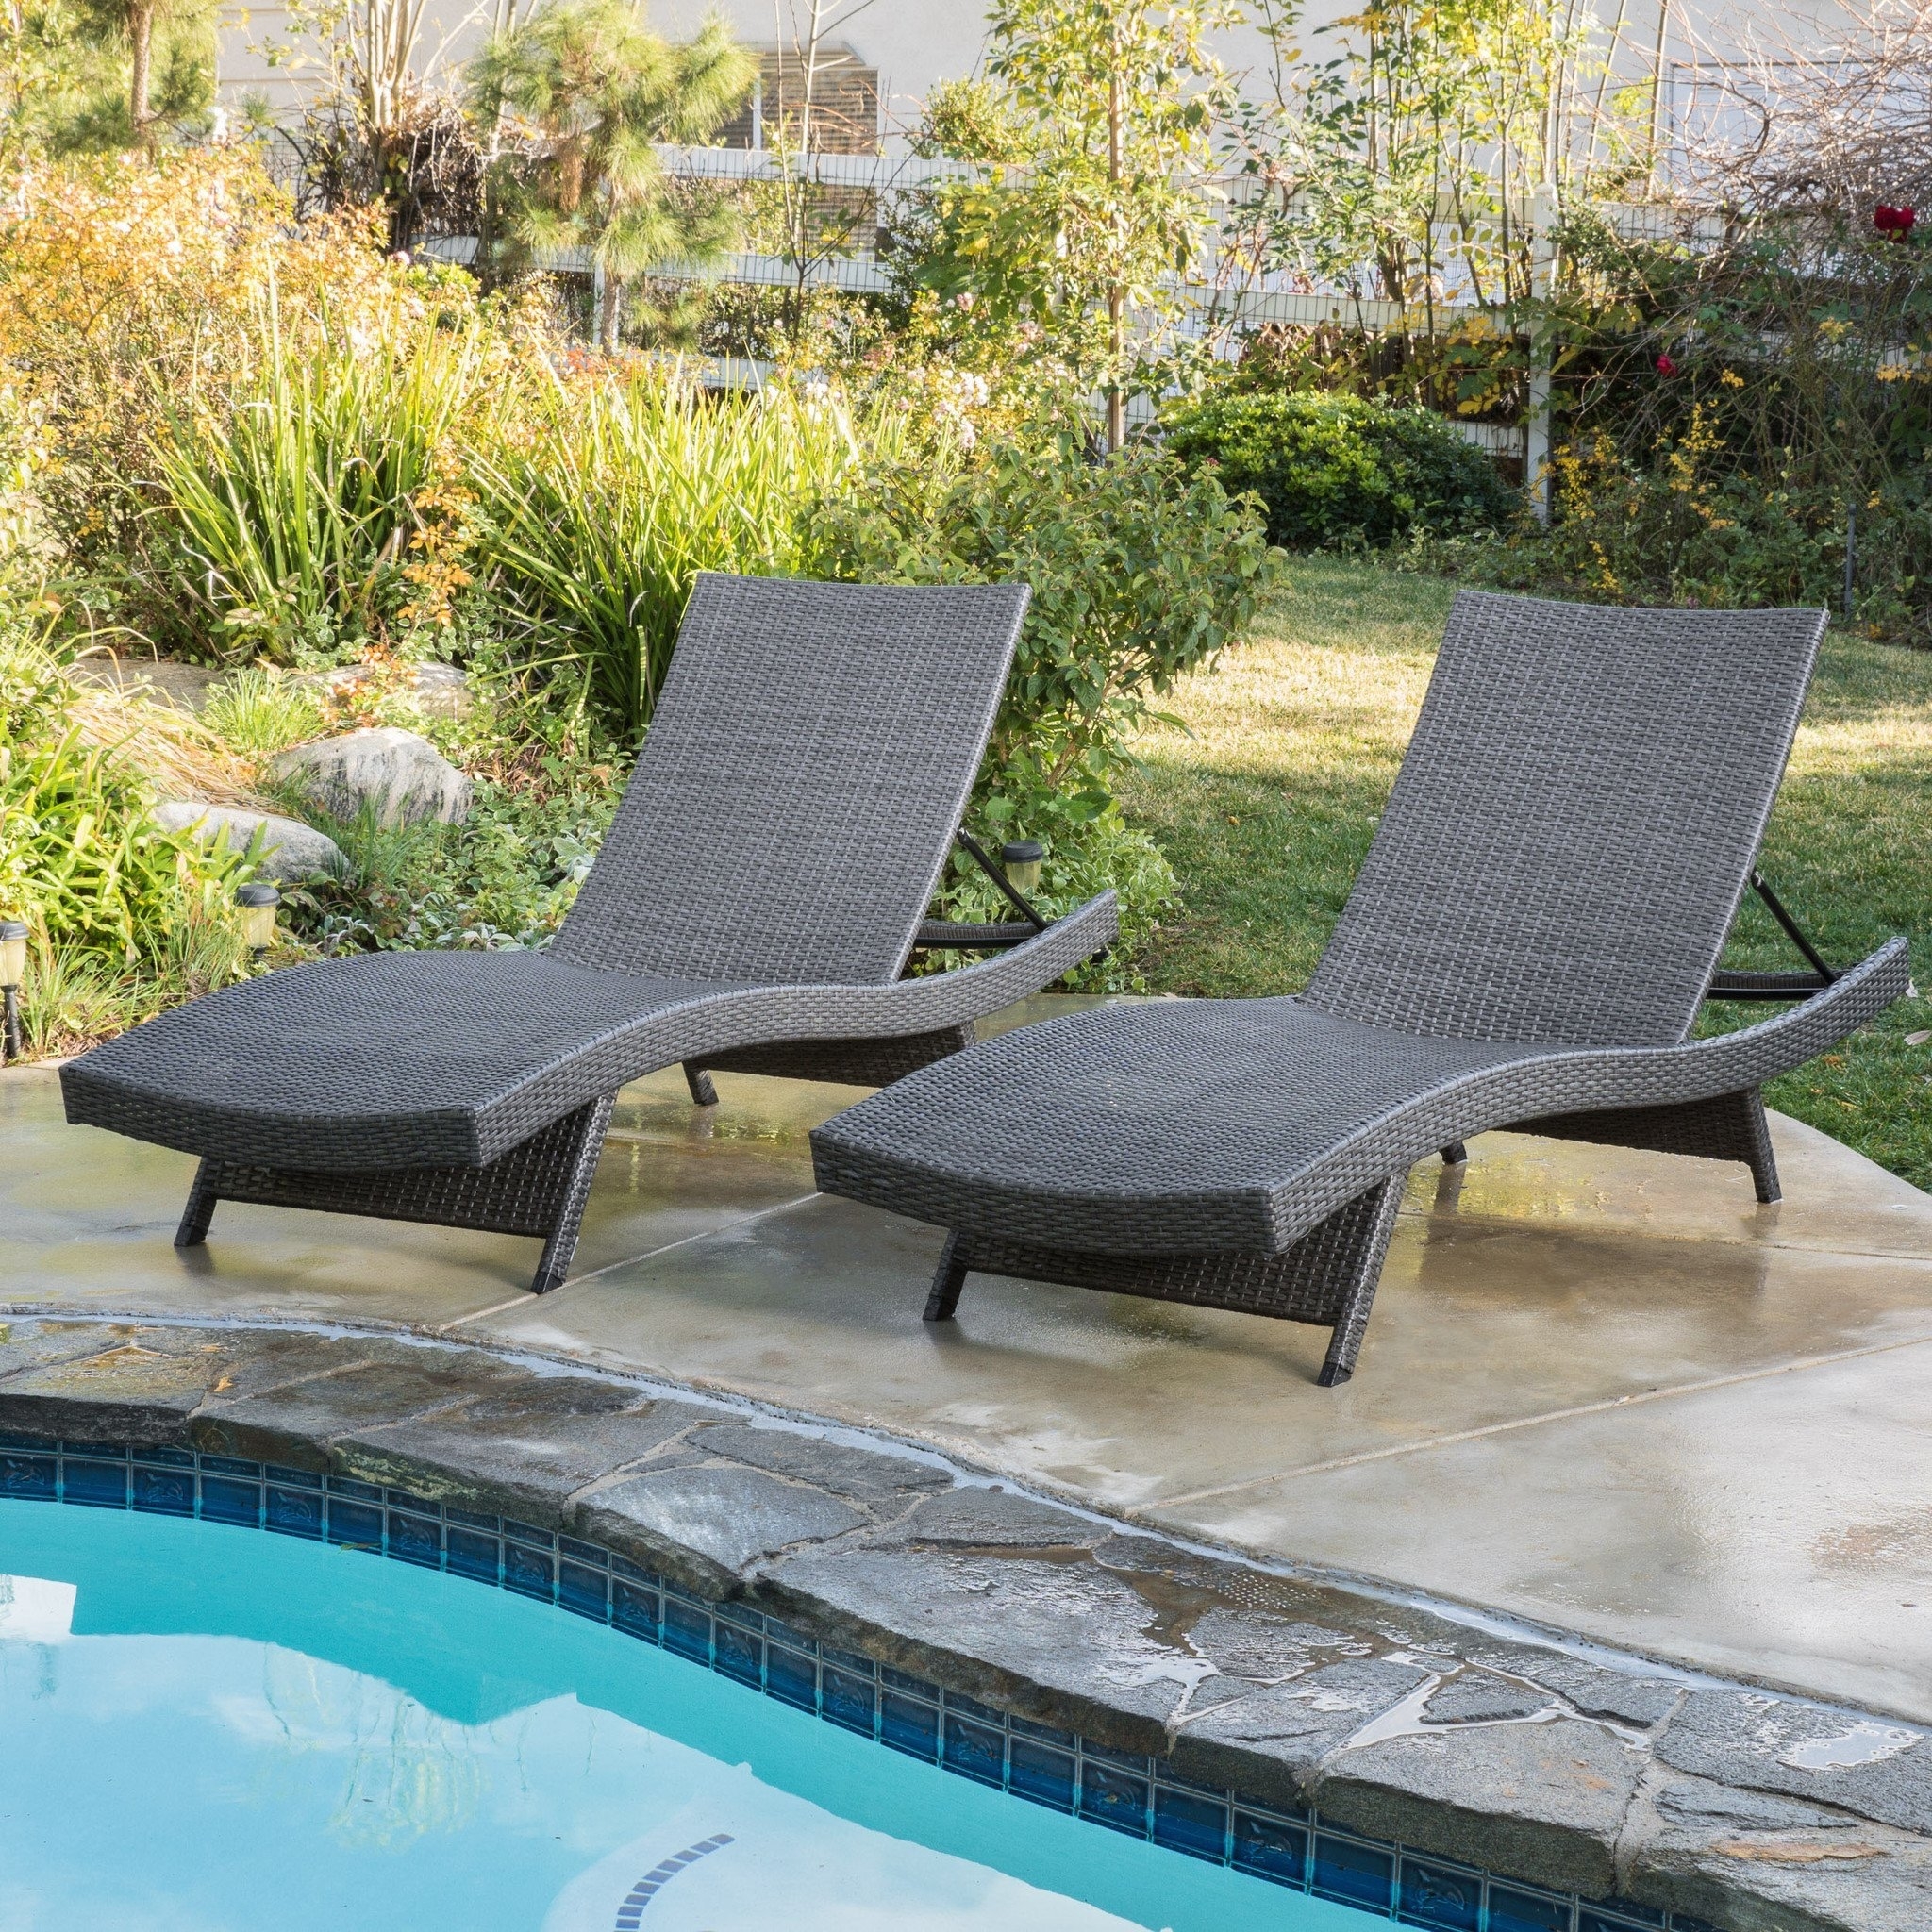 Lakeport Outdoor Grey Wicker Chaise Lounge Chairs (Set of 2)